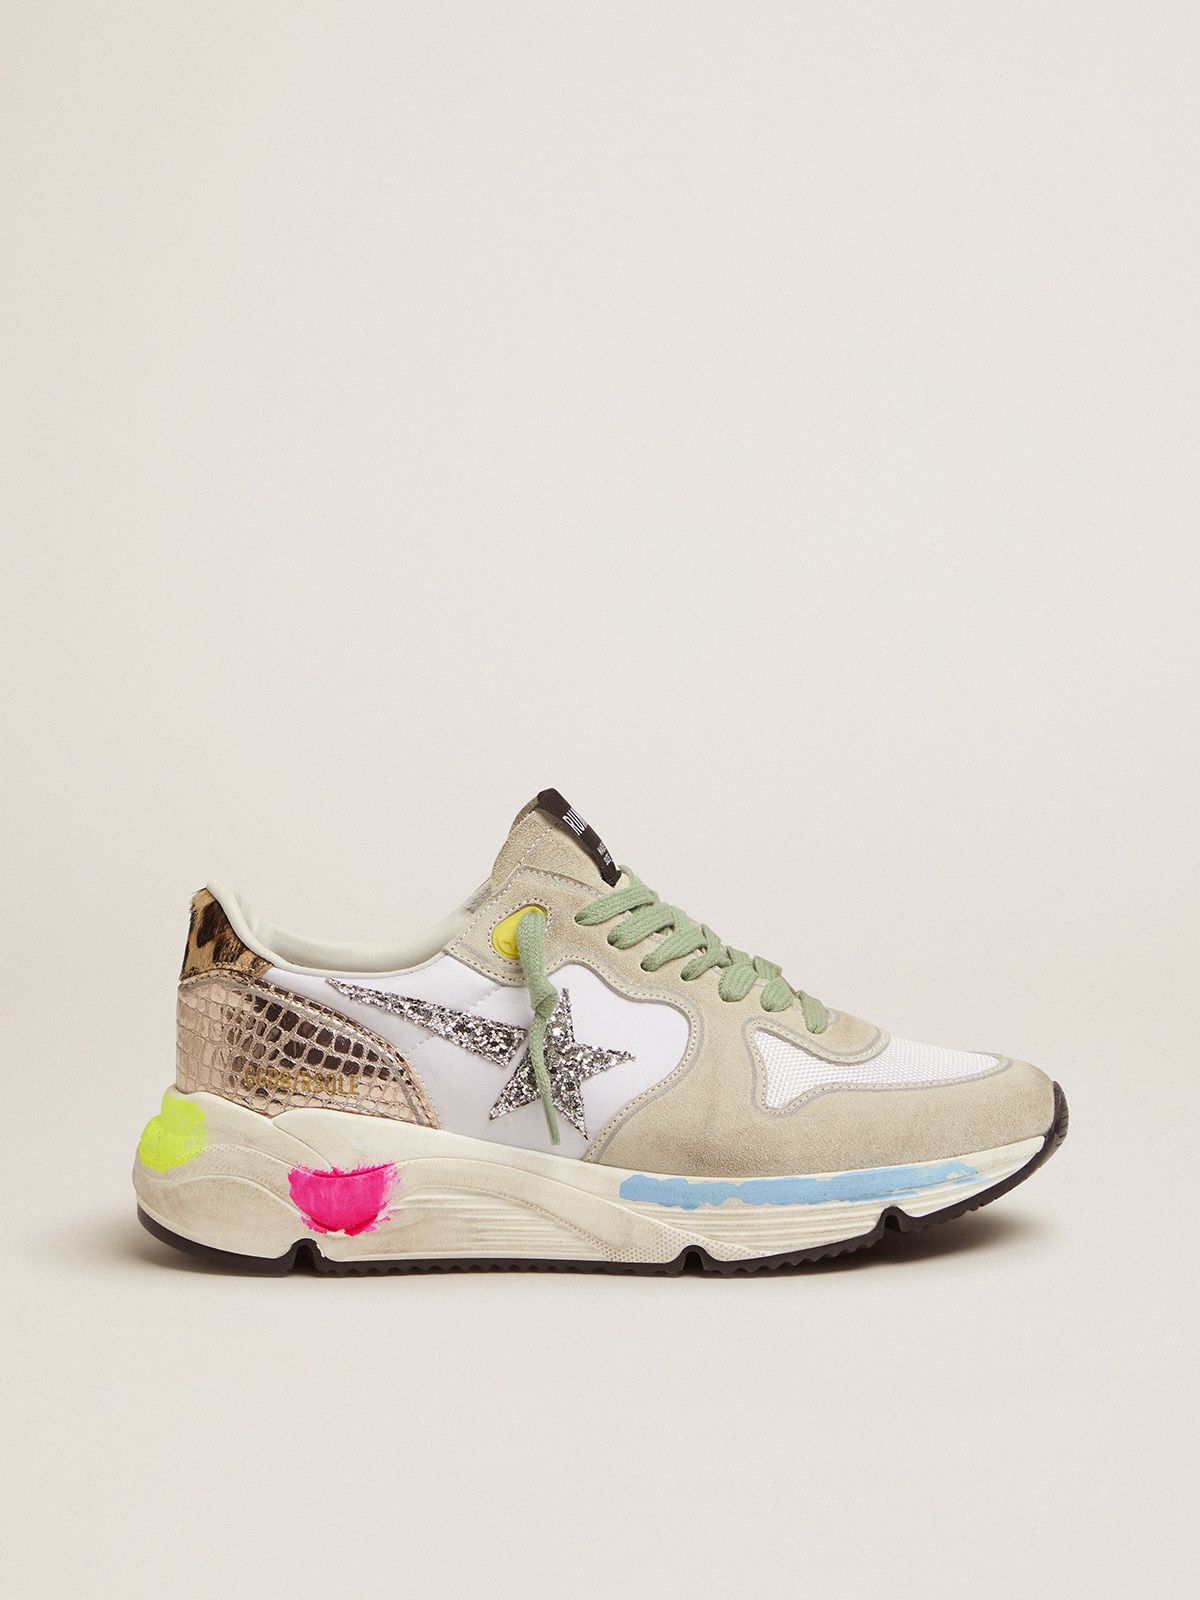 golden goose suede Sole print with Running sneakers in and glitter leopard